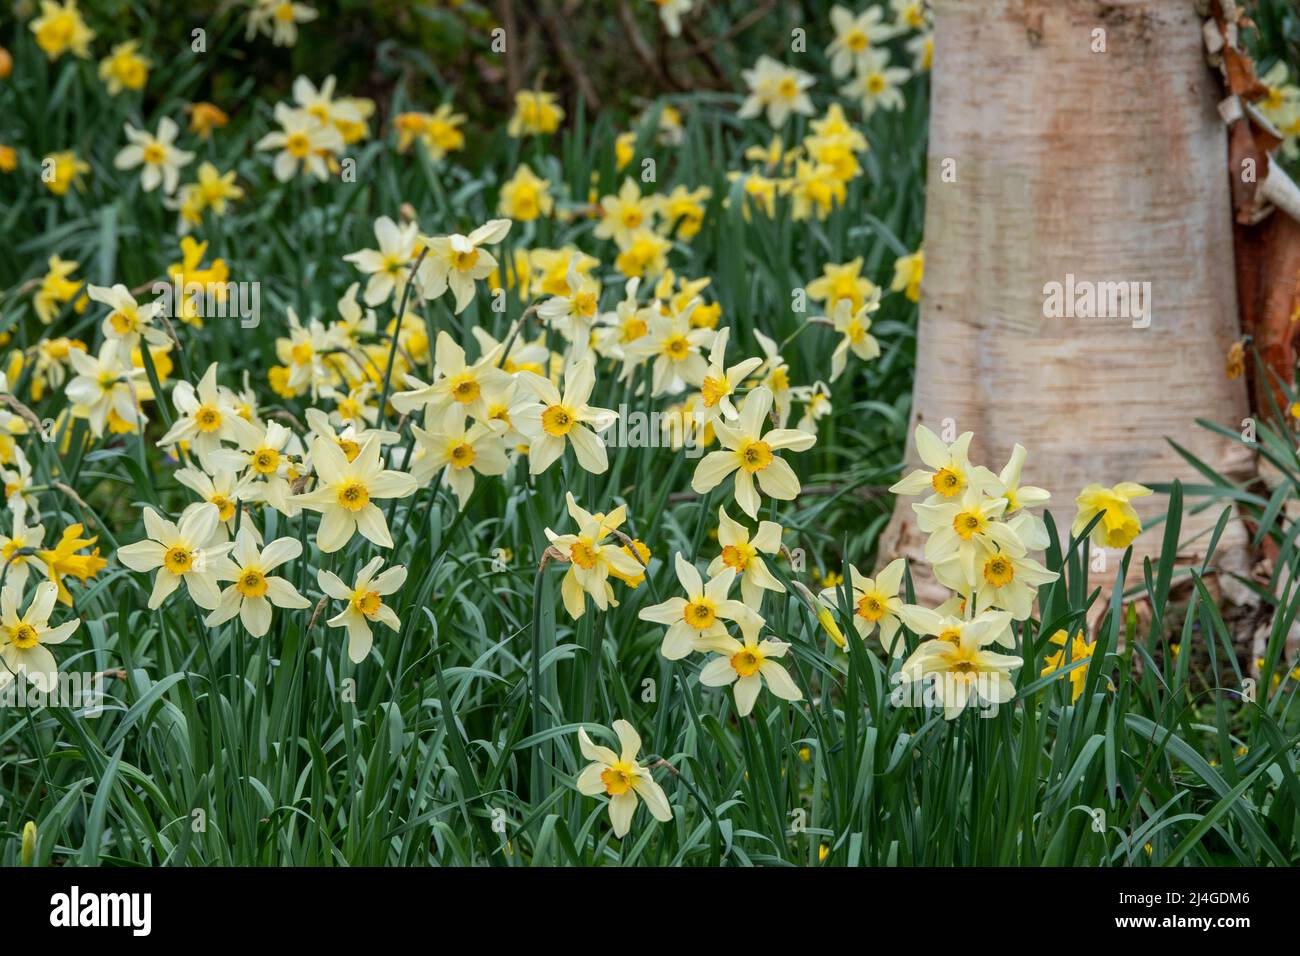 bright yellow daffodils a sign of spring Stock Photo